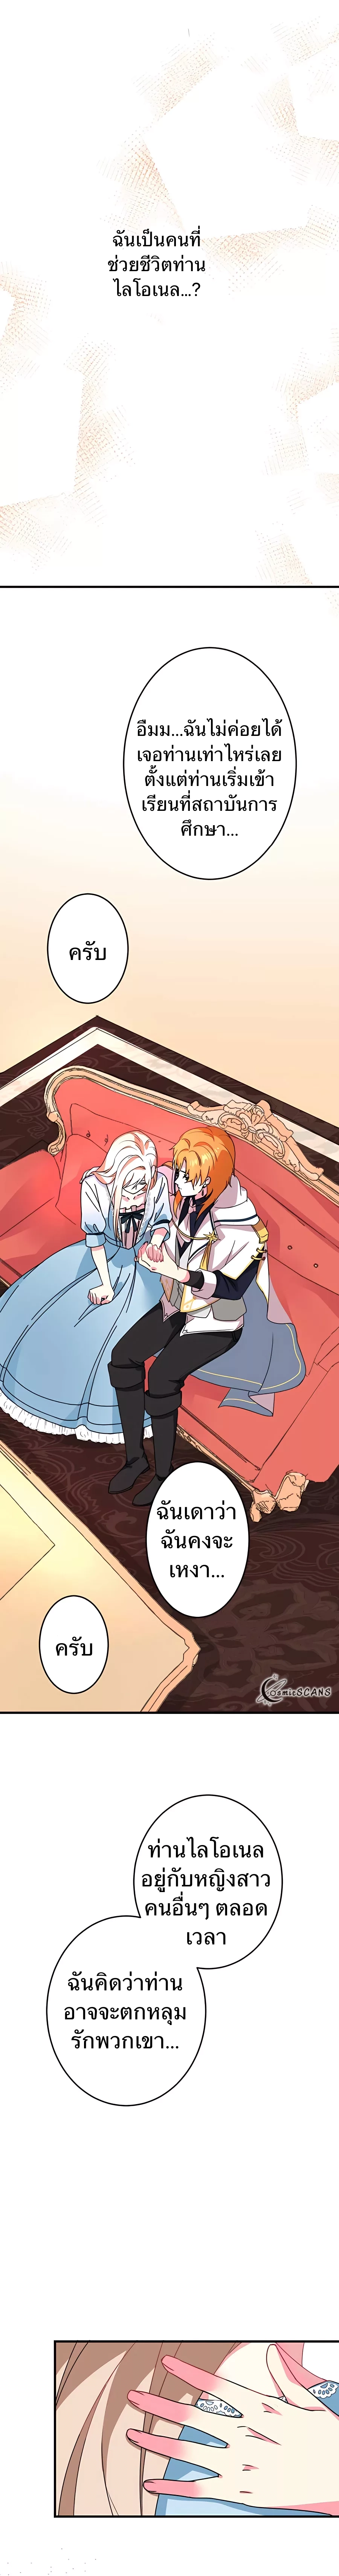 Even though I become a side character, I’m being adored by an overprotective duke EP 6